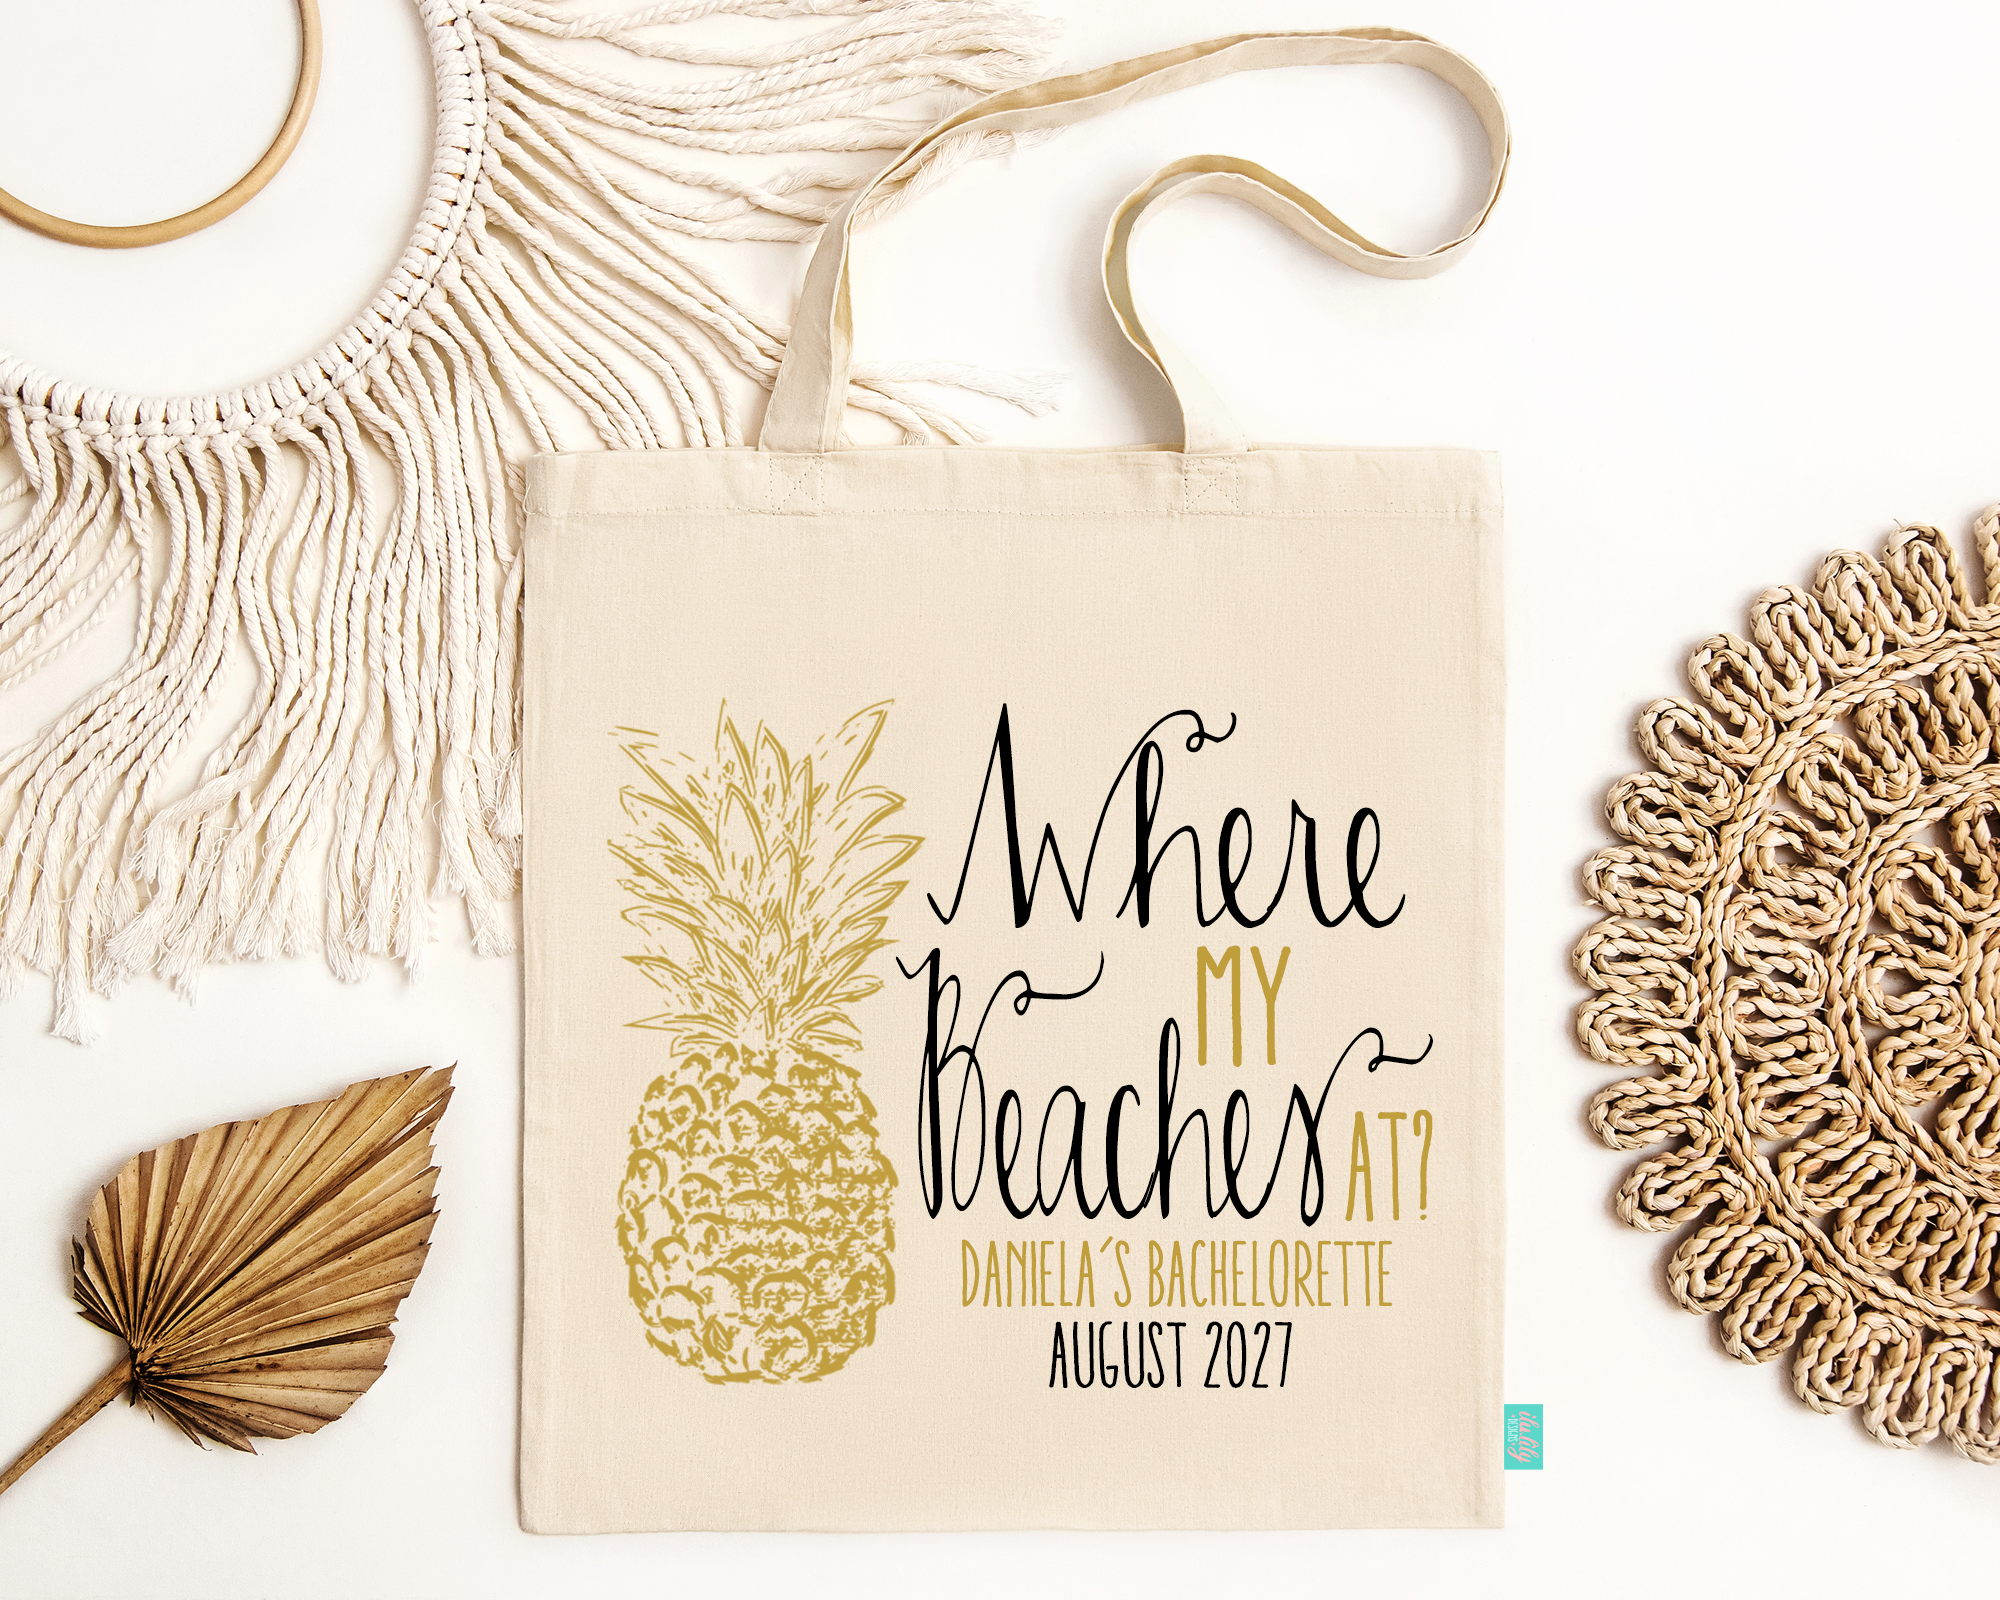 Bachelorette Party Tote Bags | Beachy Bachelorette | Gold Pineapple Where My Beaches At?